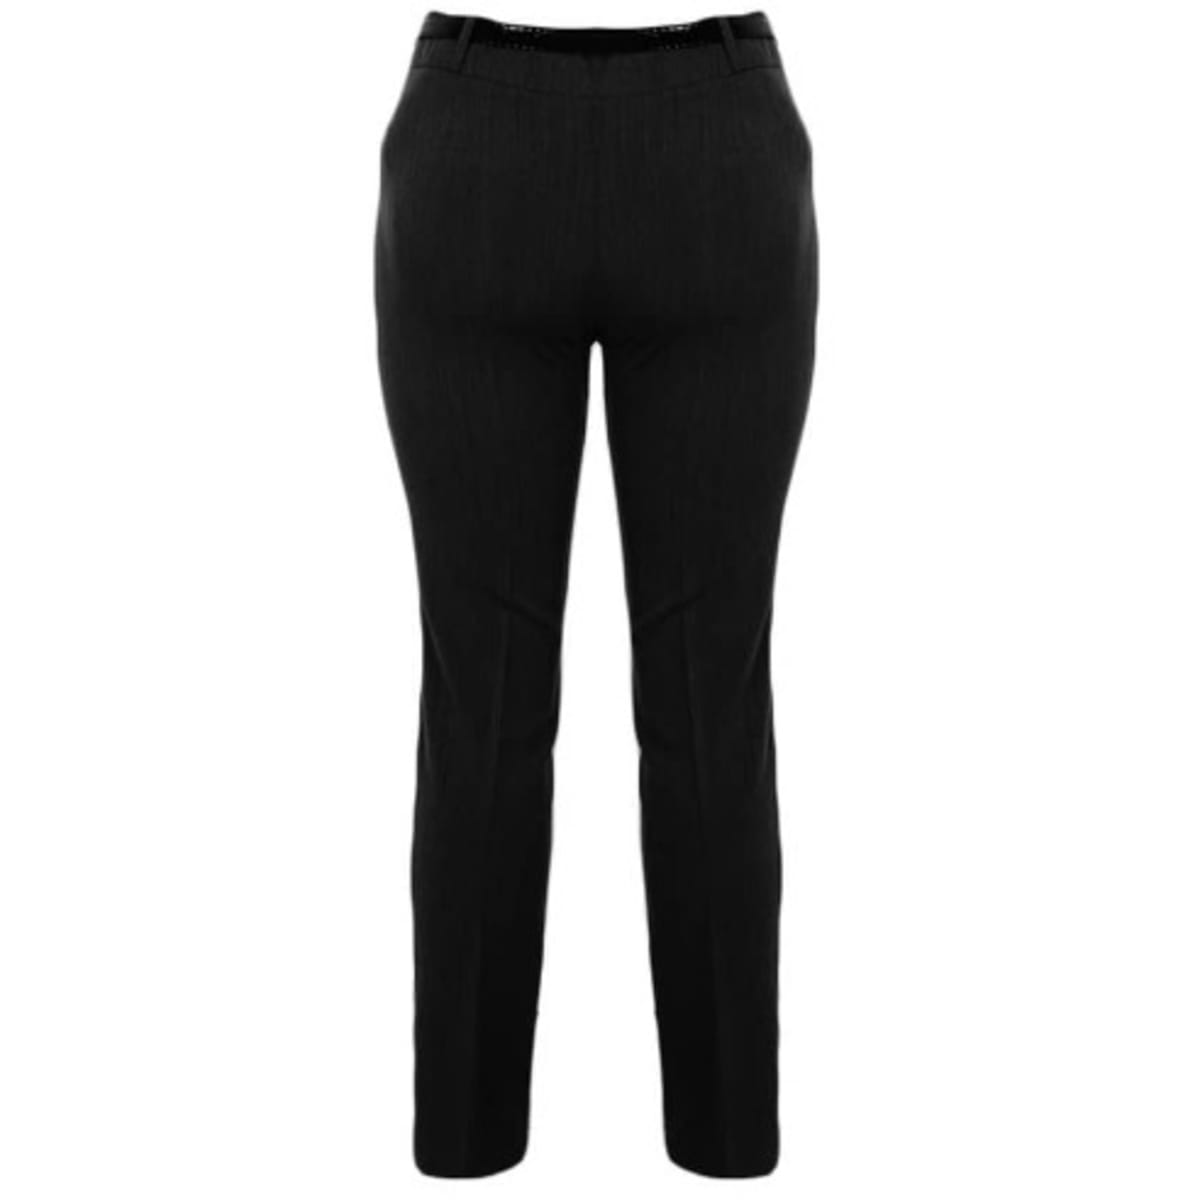 Source Black office work trousers womens slacks pencil cut pants straight  carrot fit formal pants on malibabacom